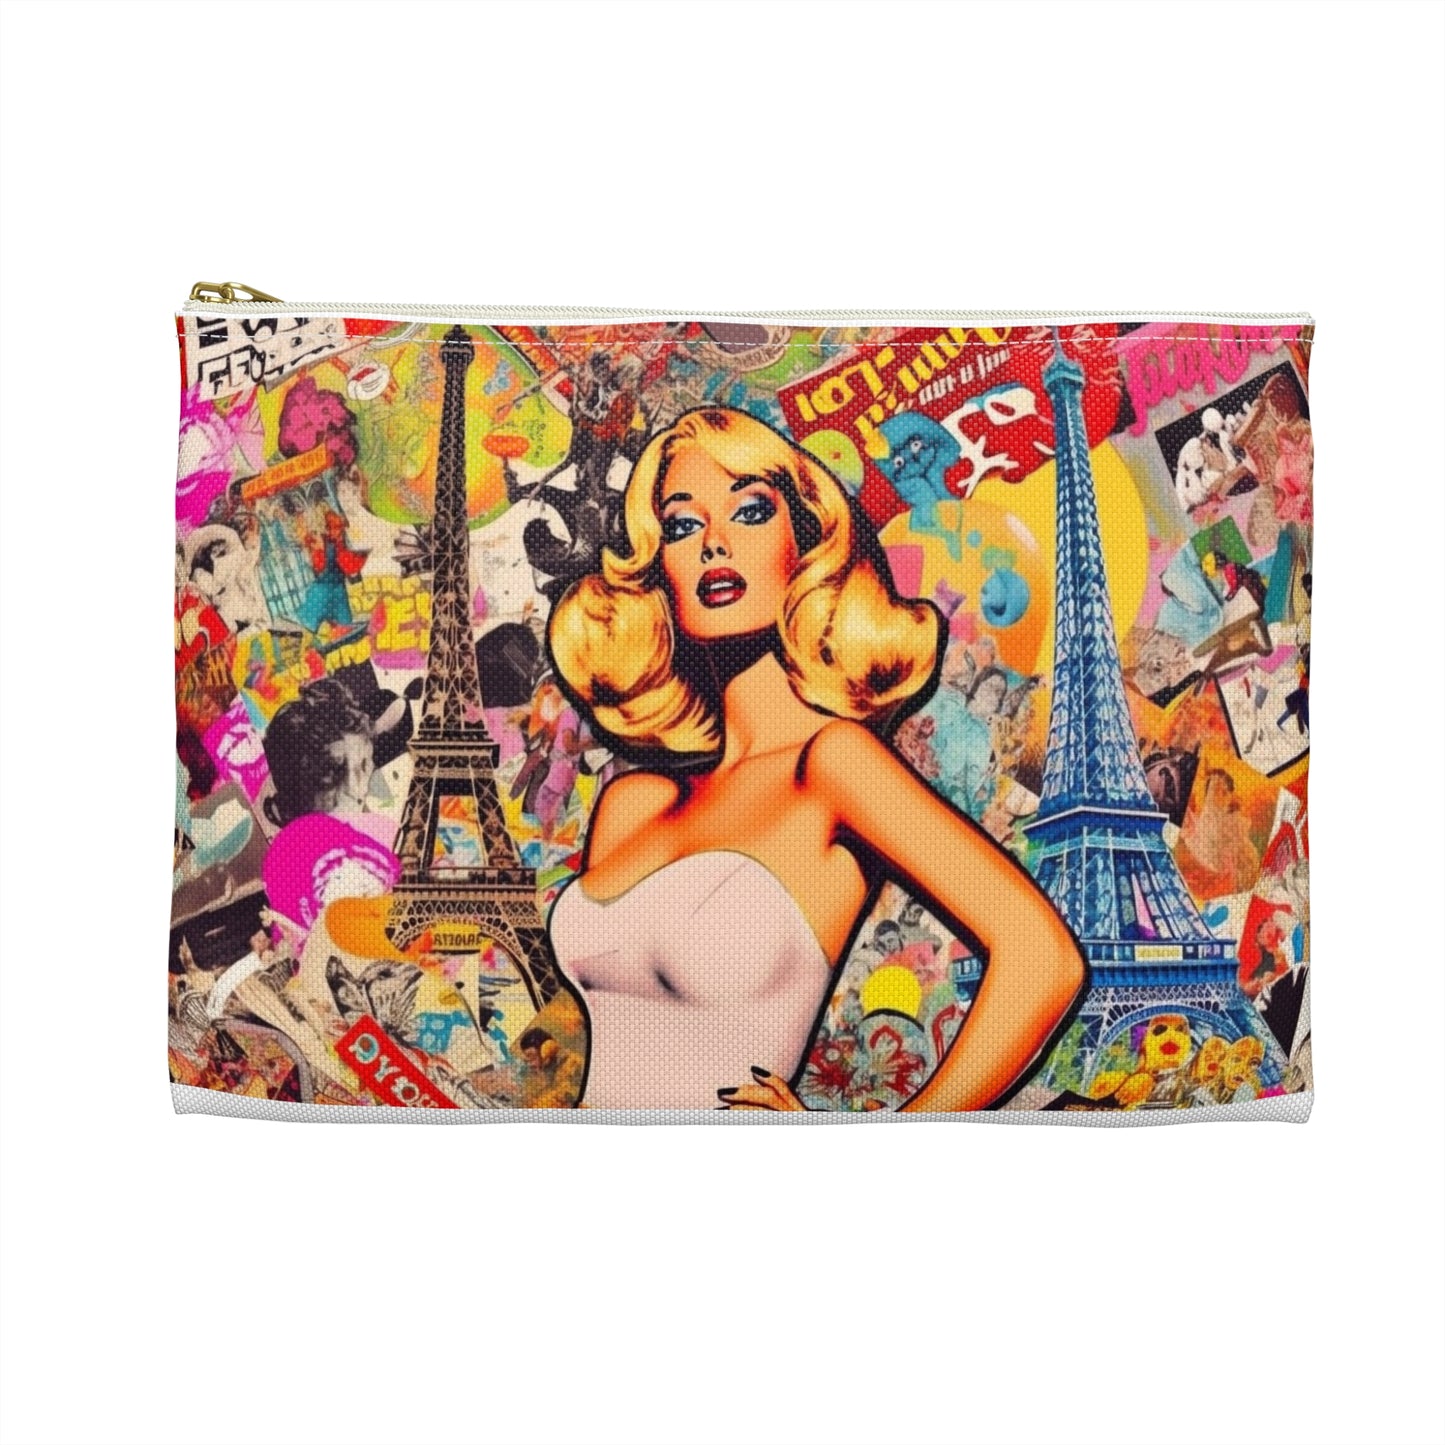 LE POP - French Kiss Pop Art, Classy, Accessory Bag, Couture, Travel, Fashion, Beauty, must have gift item, Pouch